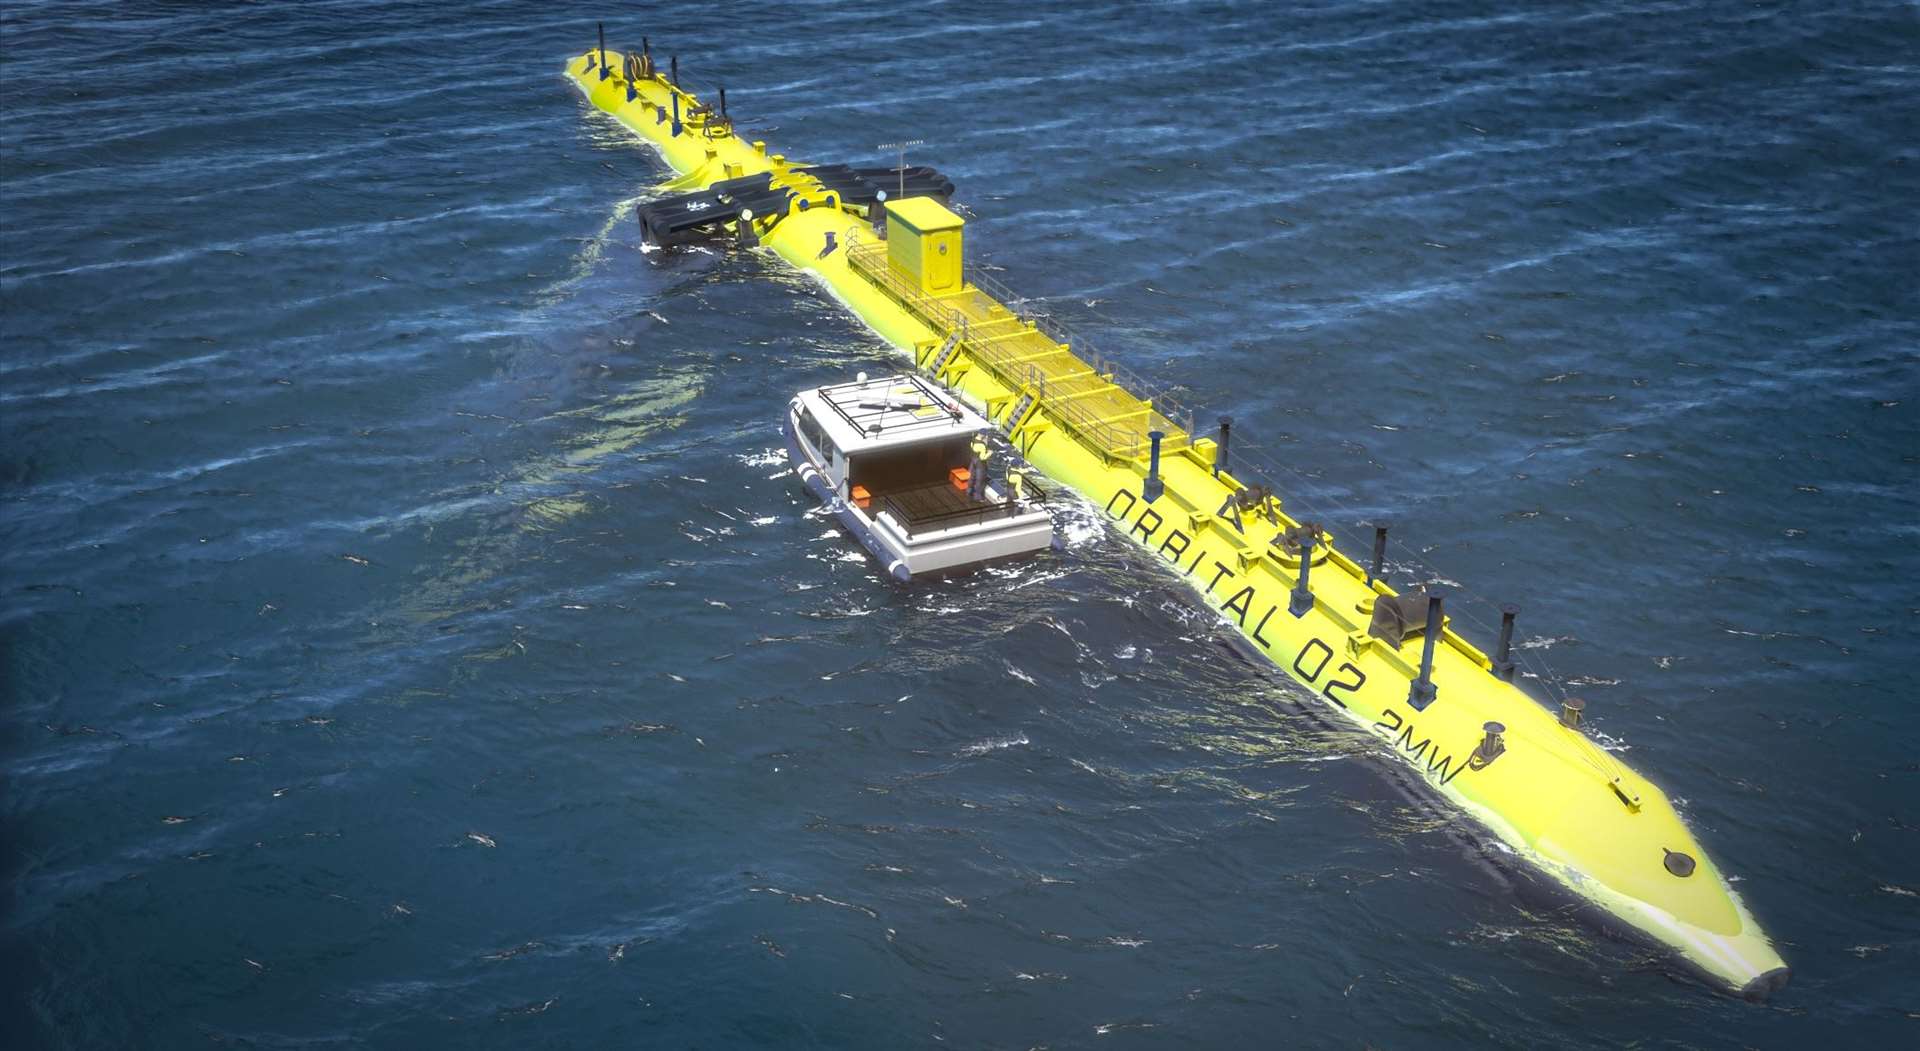 The new O2 tidal stream turbine will have a generating capacity of more than 2MW.